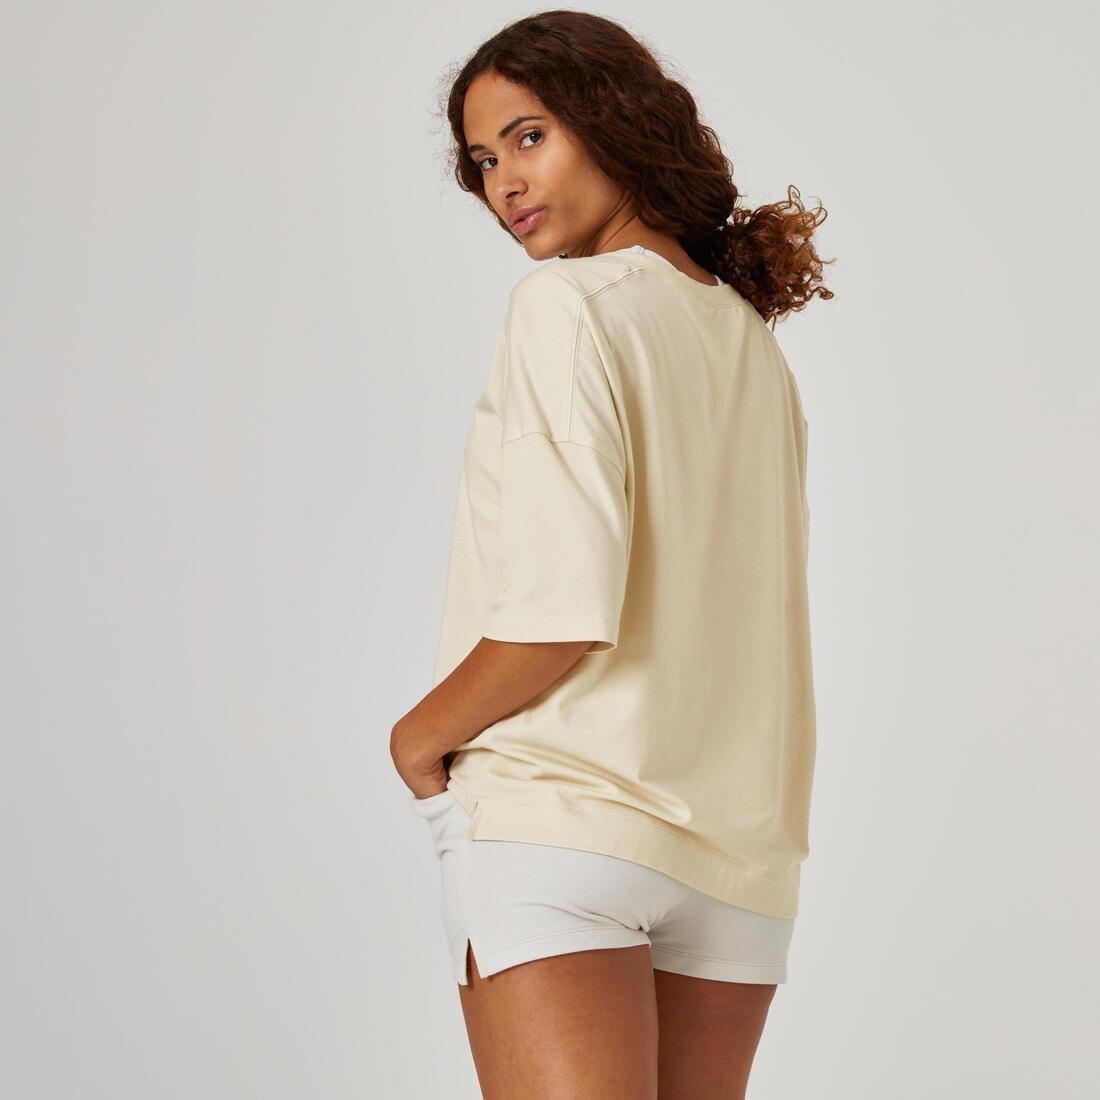 DOMYOS - Womens Loose-Fit Fitness T-Shirt 520, Beige